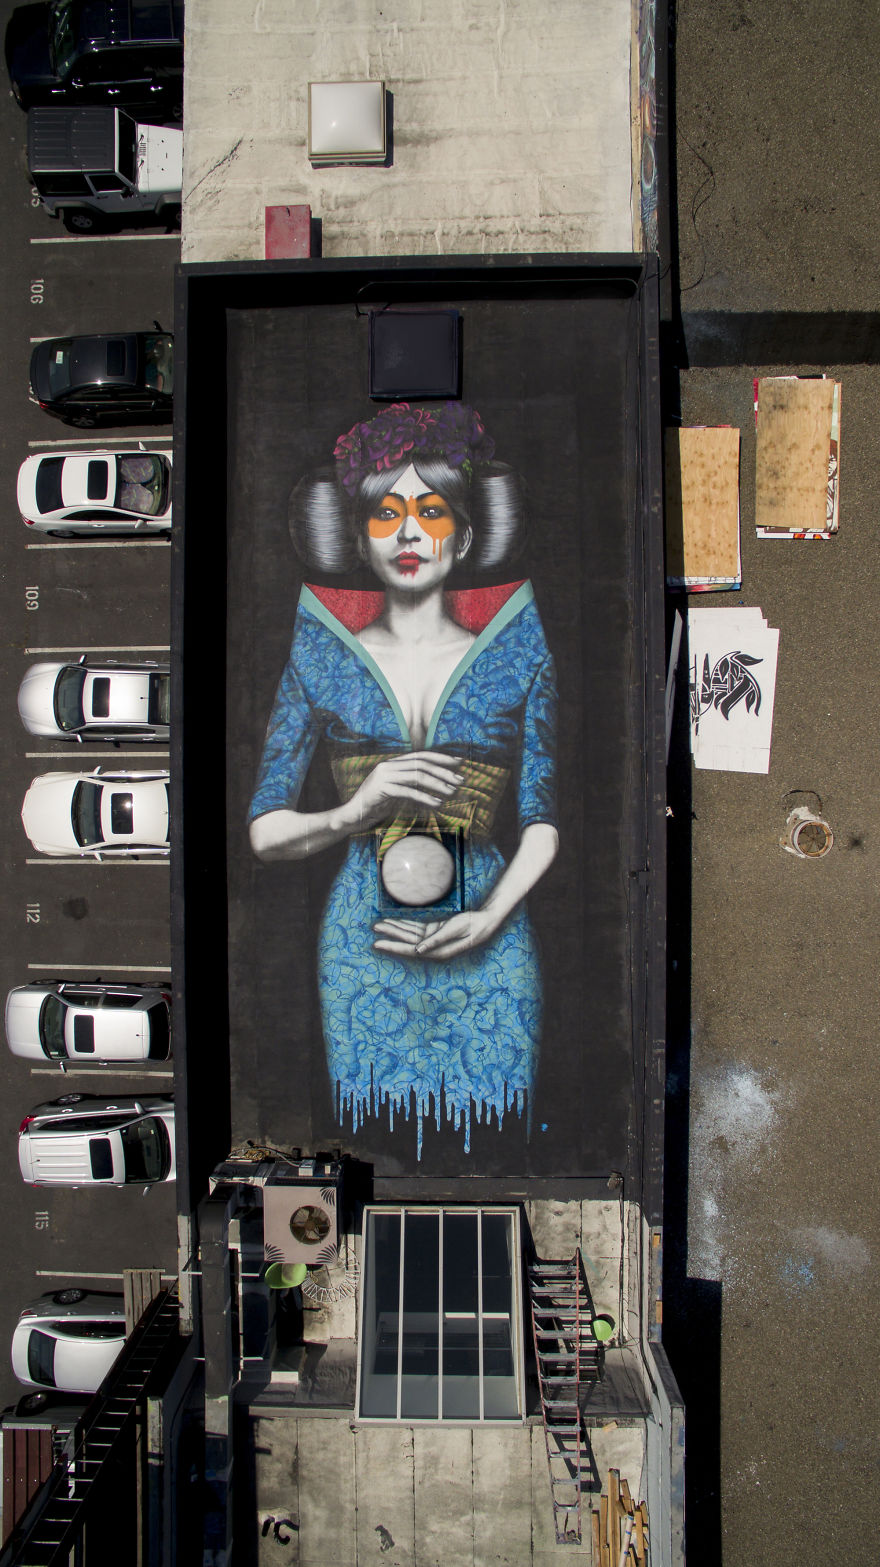 Fin Dac's New Rooftop Mural In San Francisco